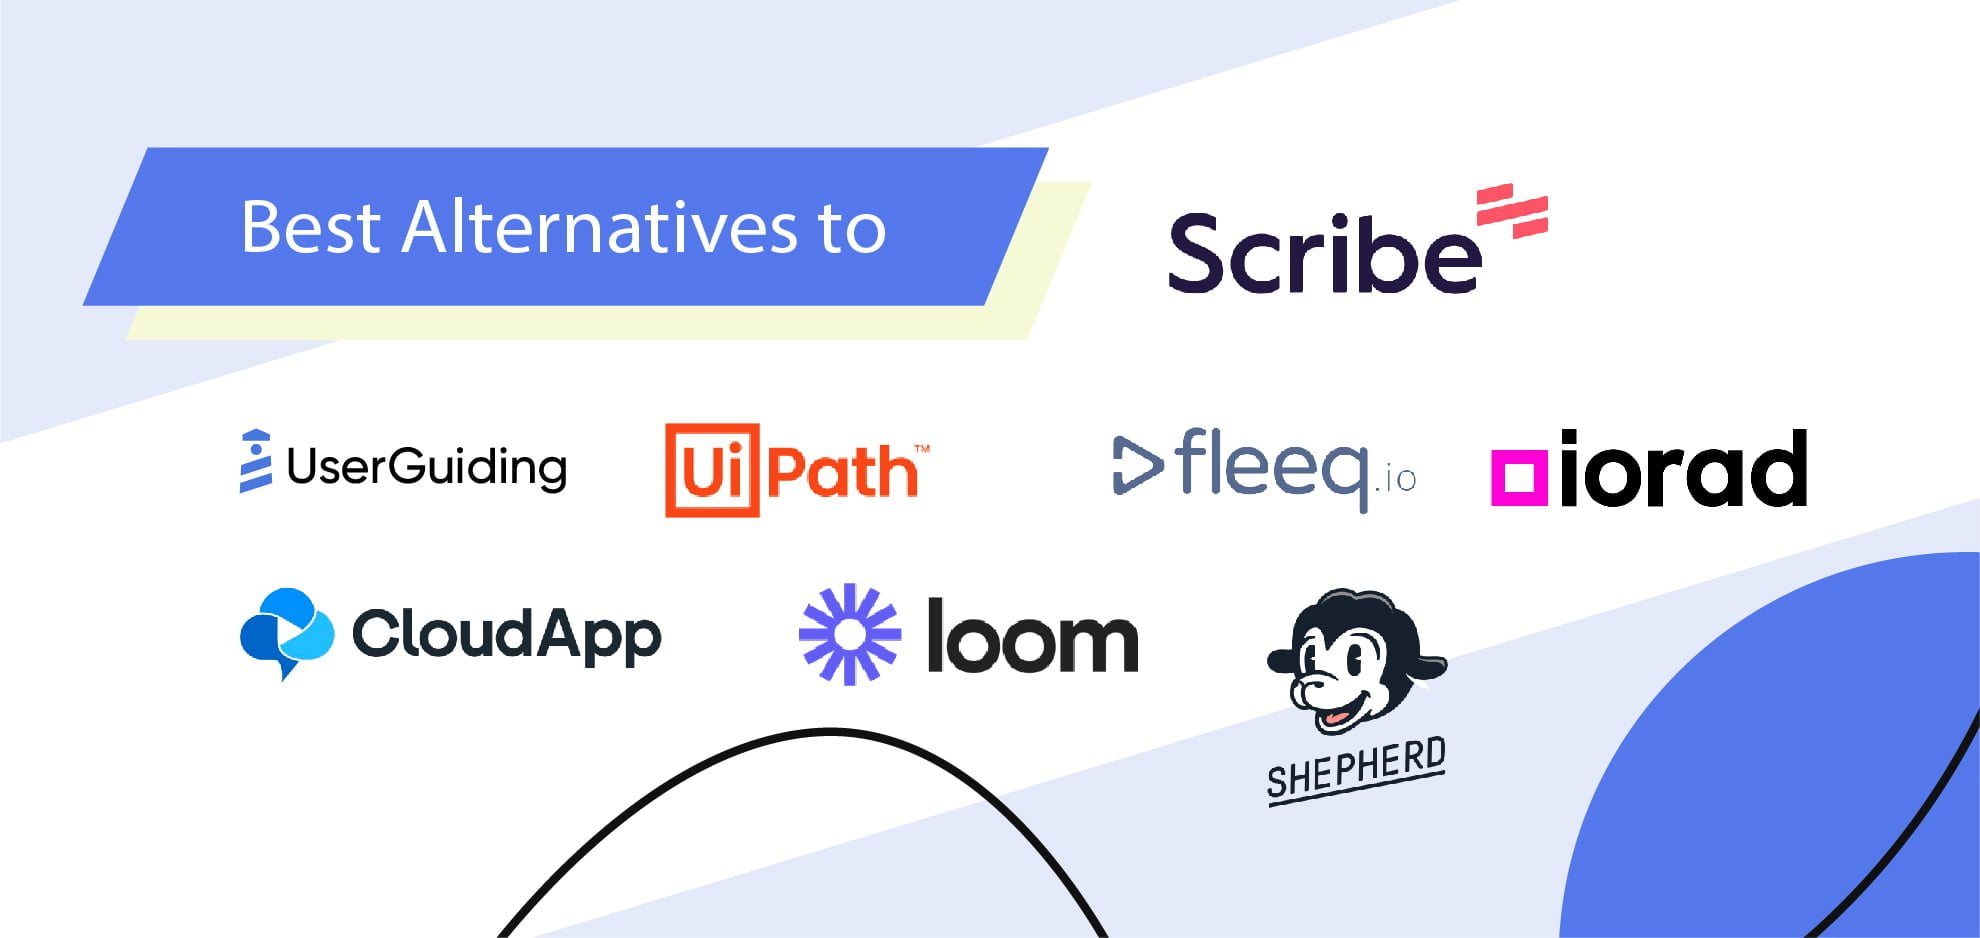 scribe alternatives and competitors